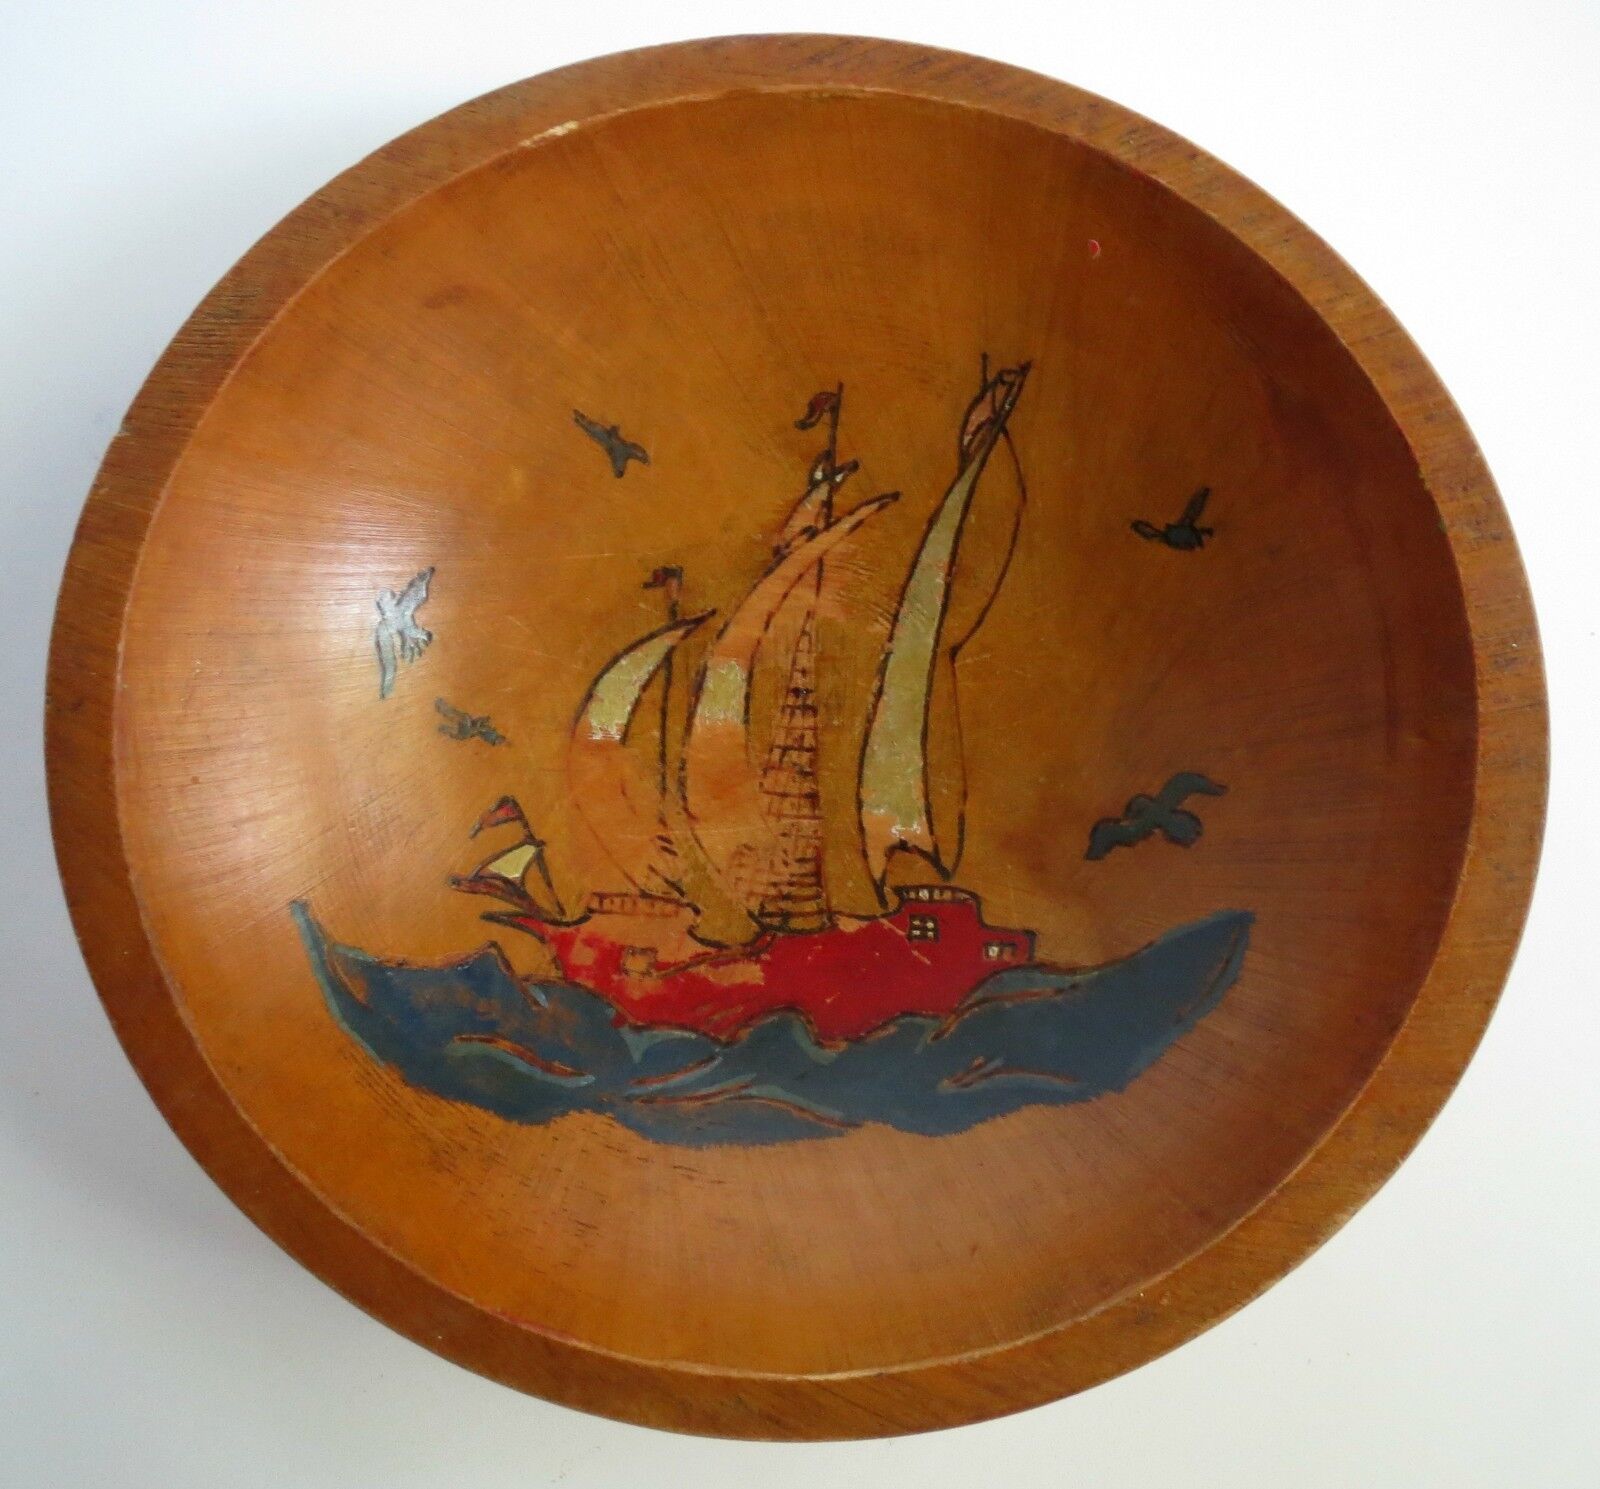 Vintage Wooden Hand Painted Bowl with Scene of Red Boat Ship Sea Sails Fishing